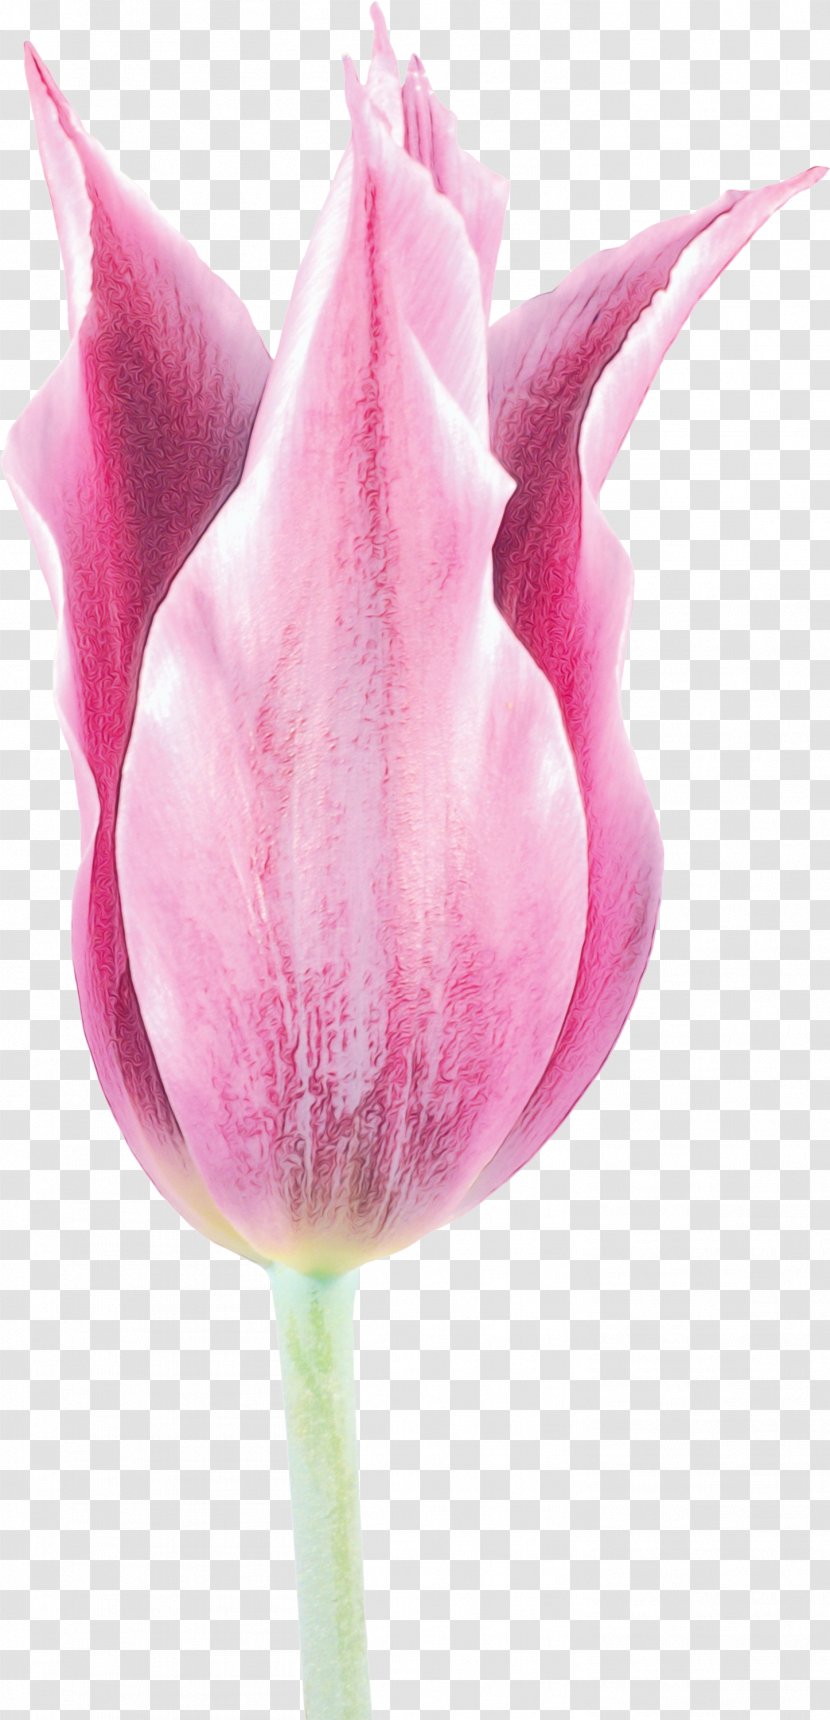 Pink Petal Tulip Flower Plant - Lily Family Bud Transparent PNG